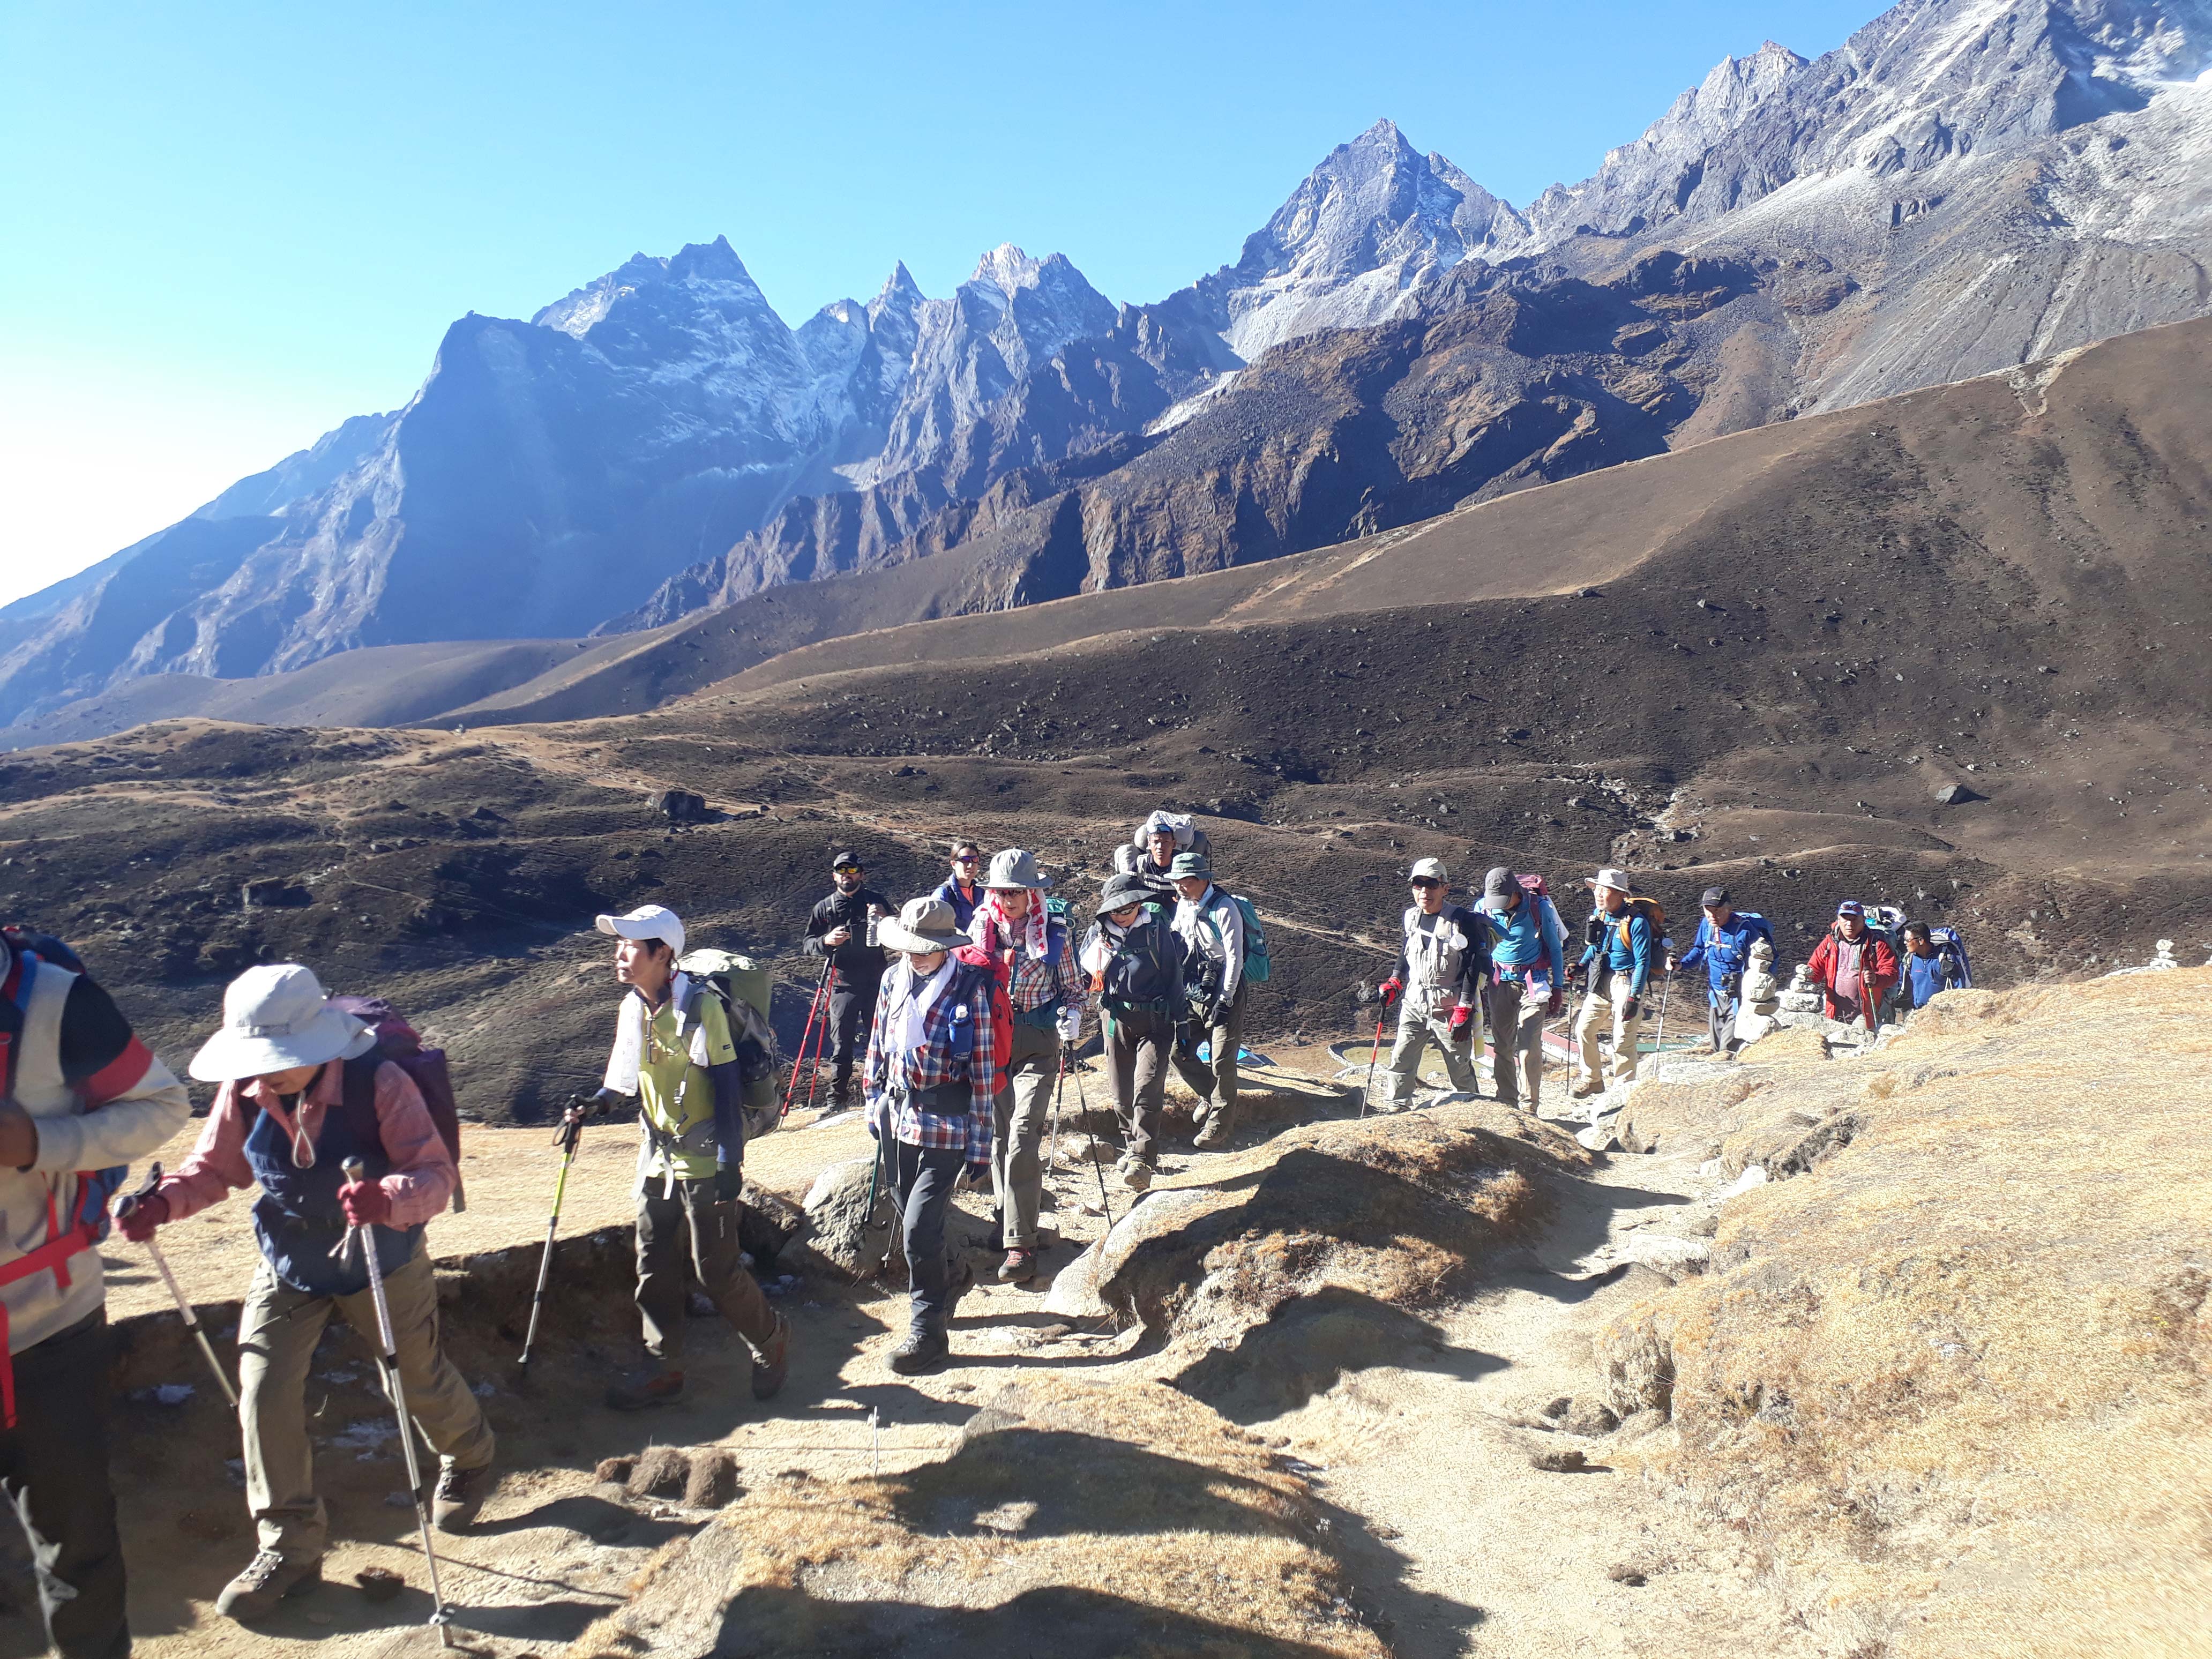 Nepal collects over US$500,000 revenue from autumn mountaineering season